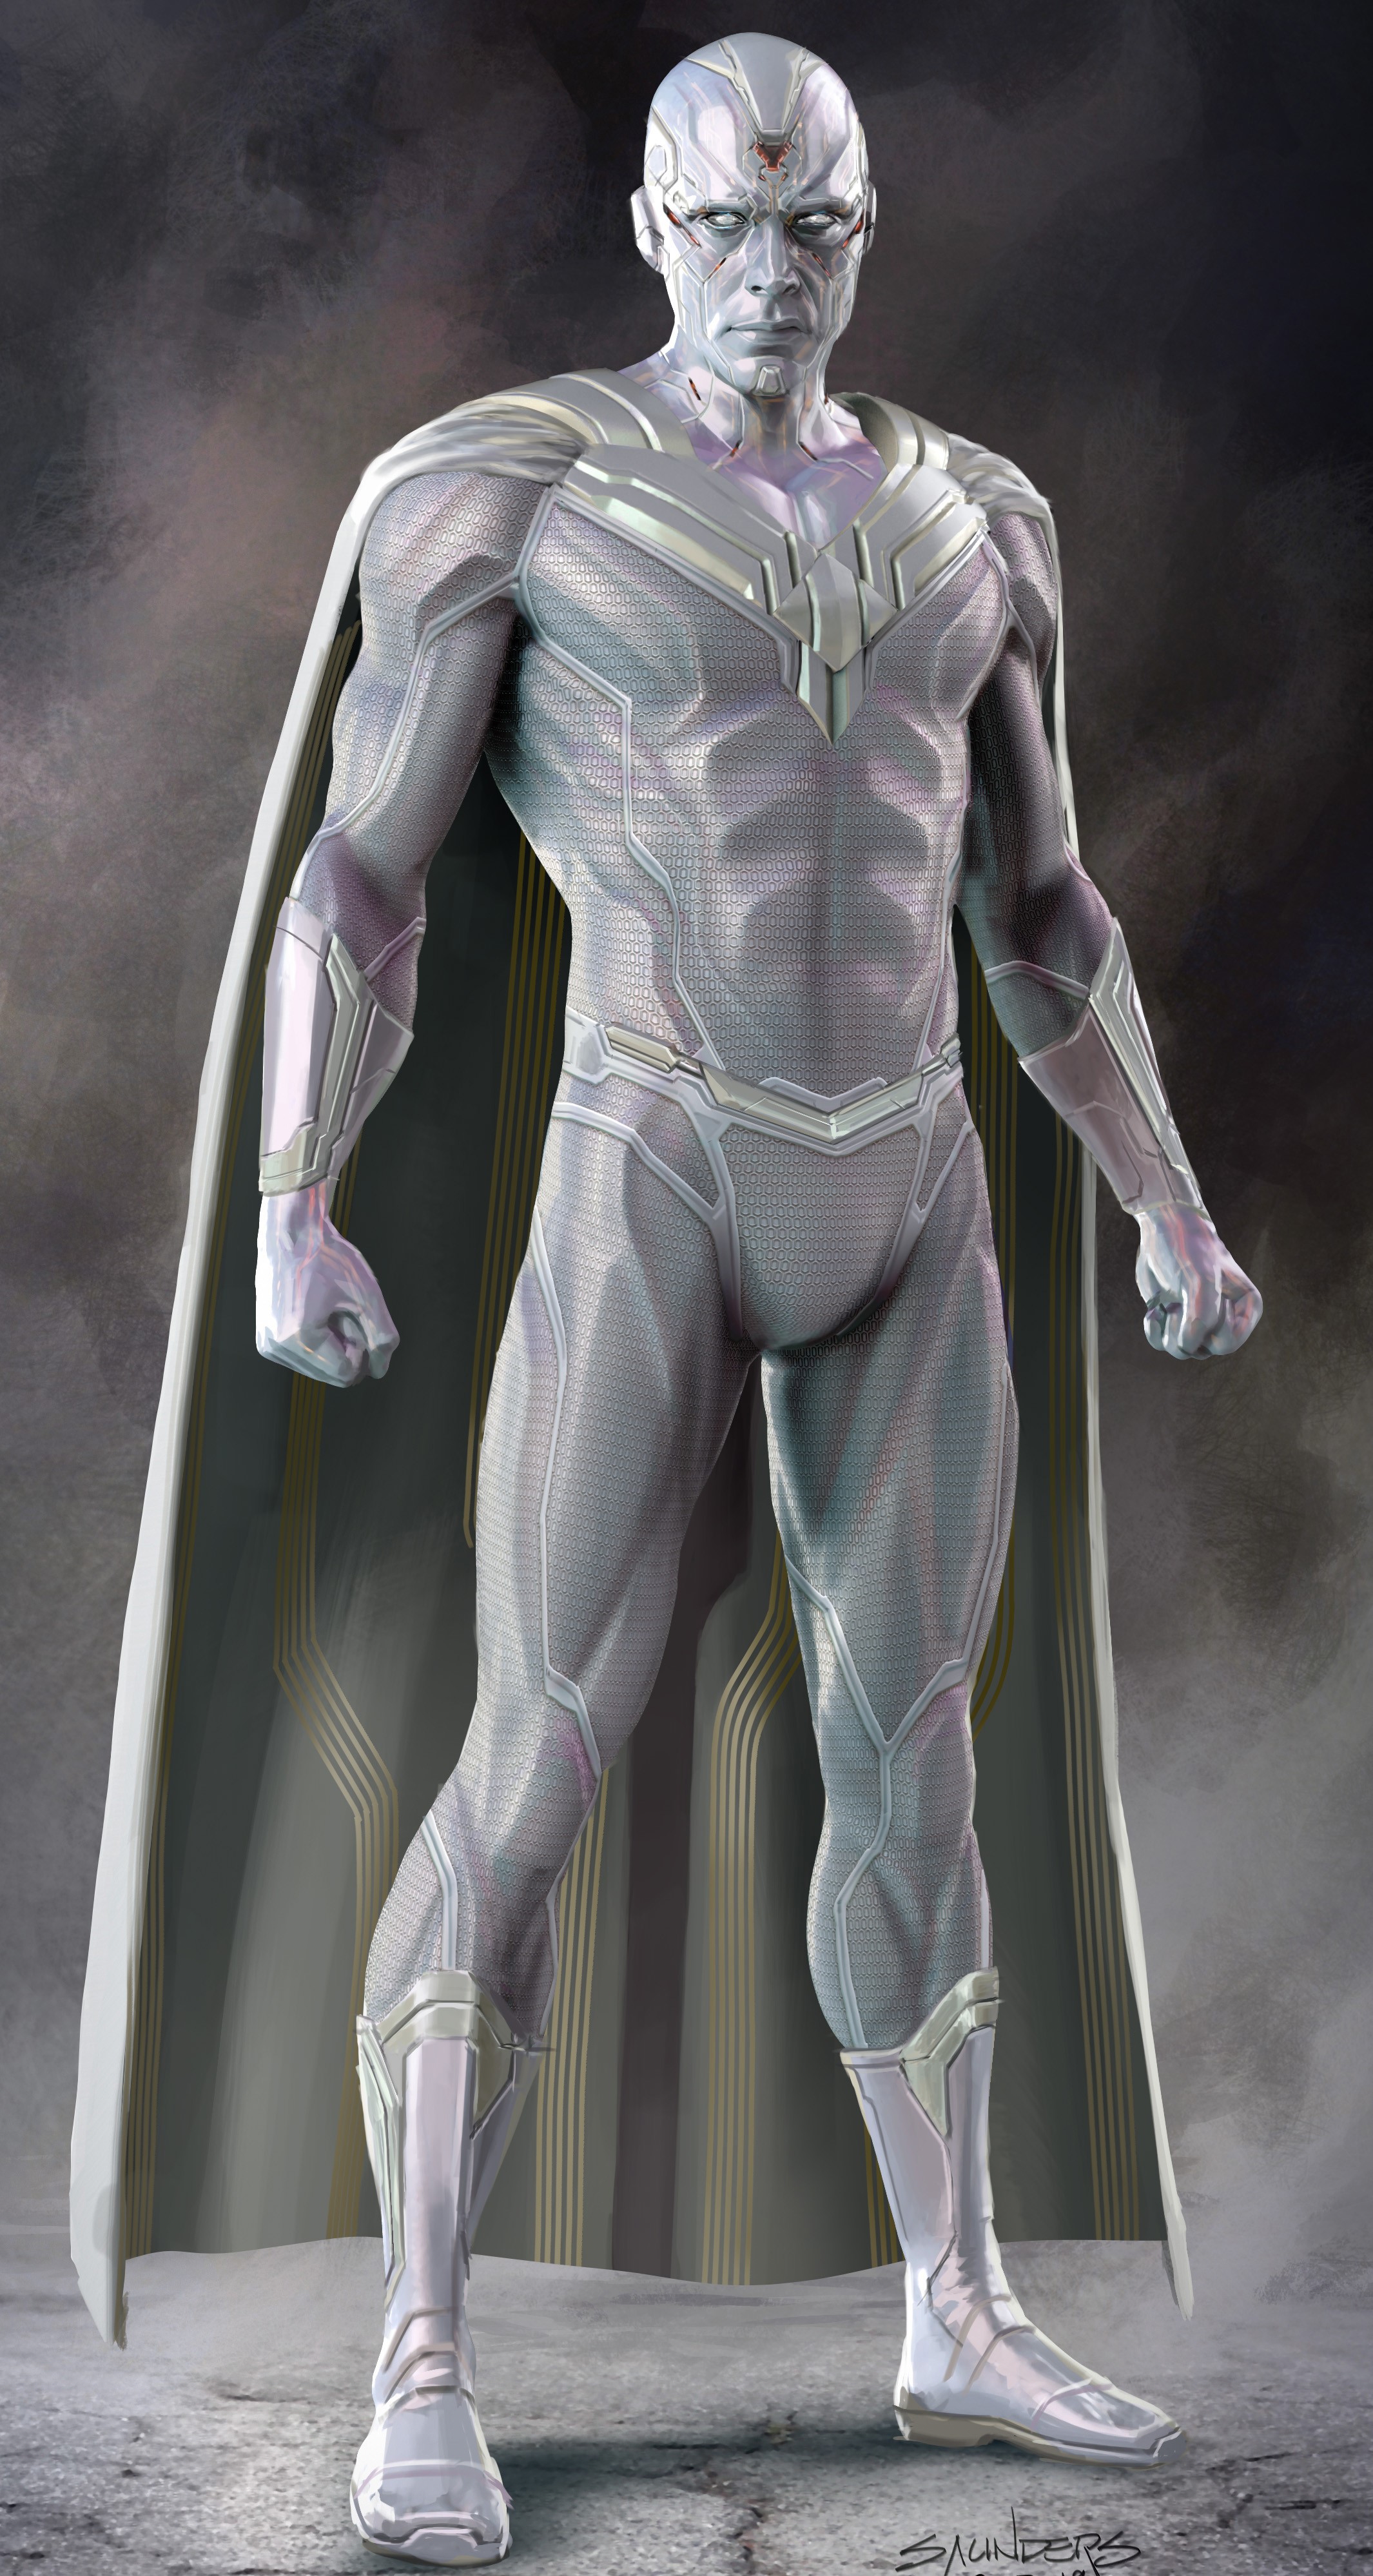 Moon Knight, Marvel Cinematic Universe Wiki